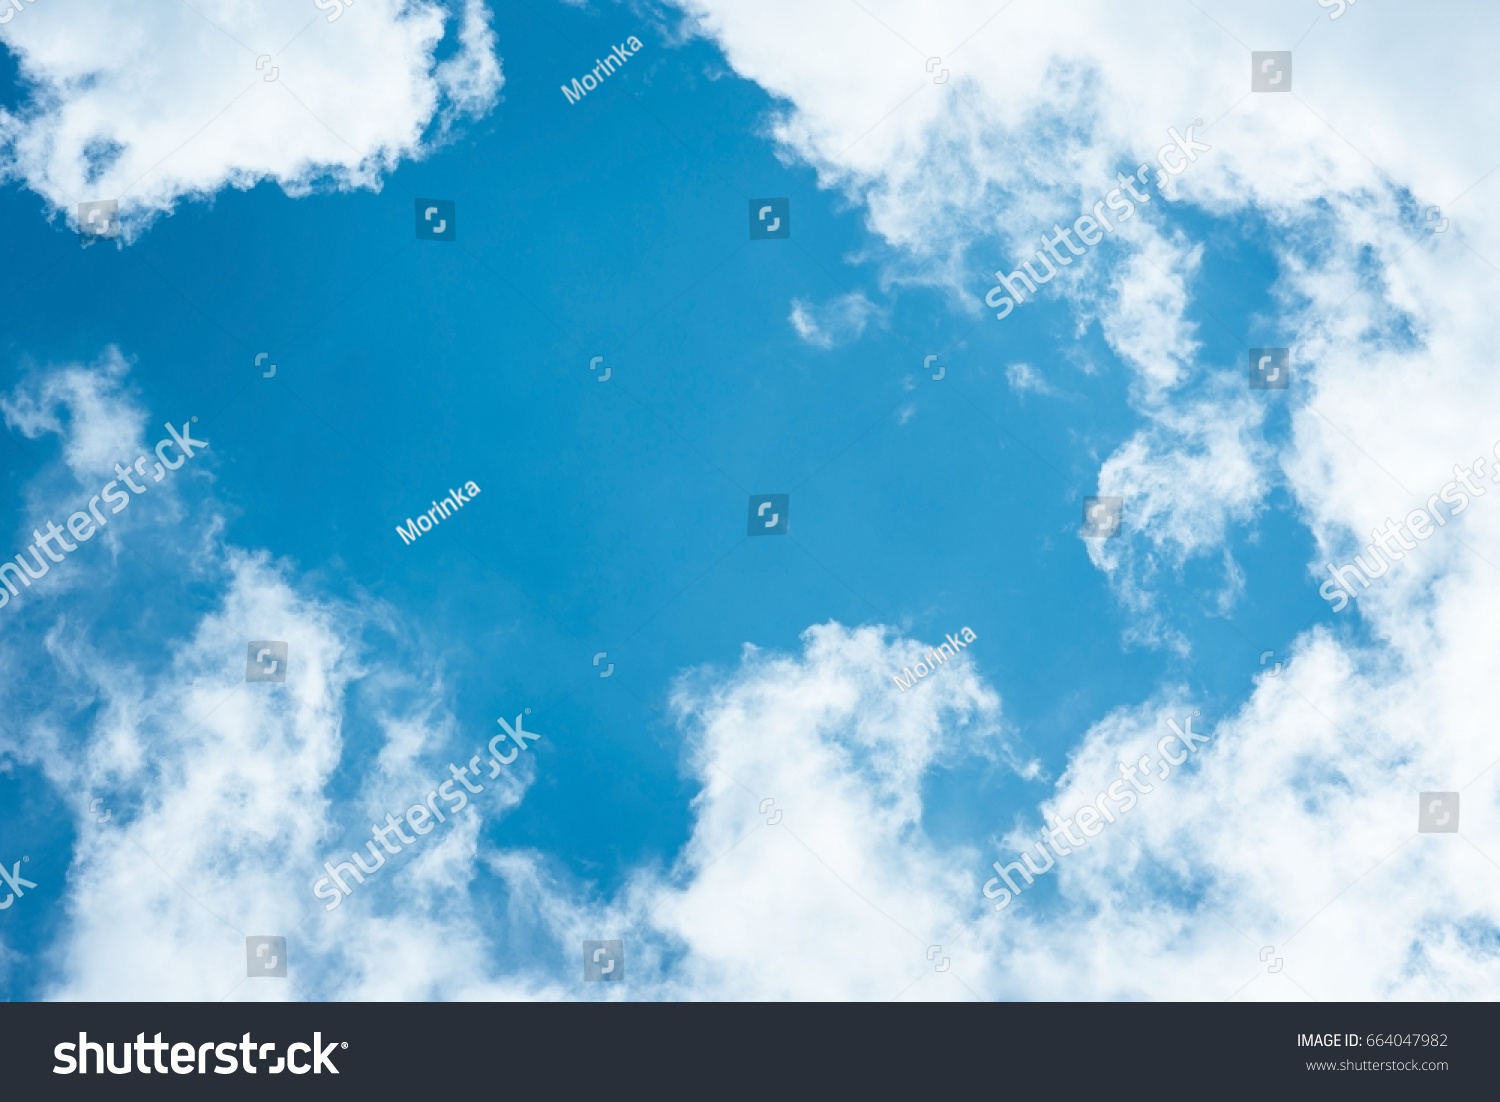 Cumulus humilis clouds in the blue sky, view from below #664047982